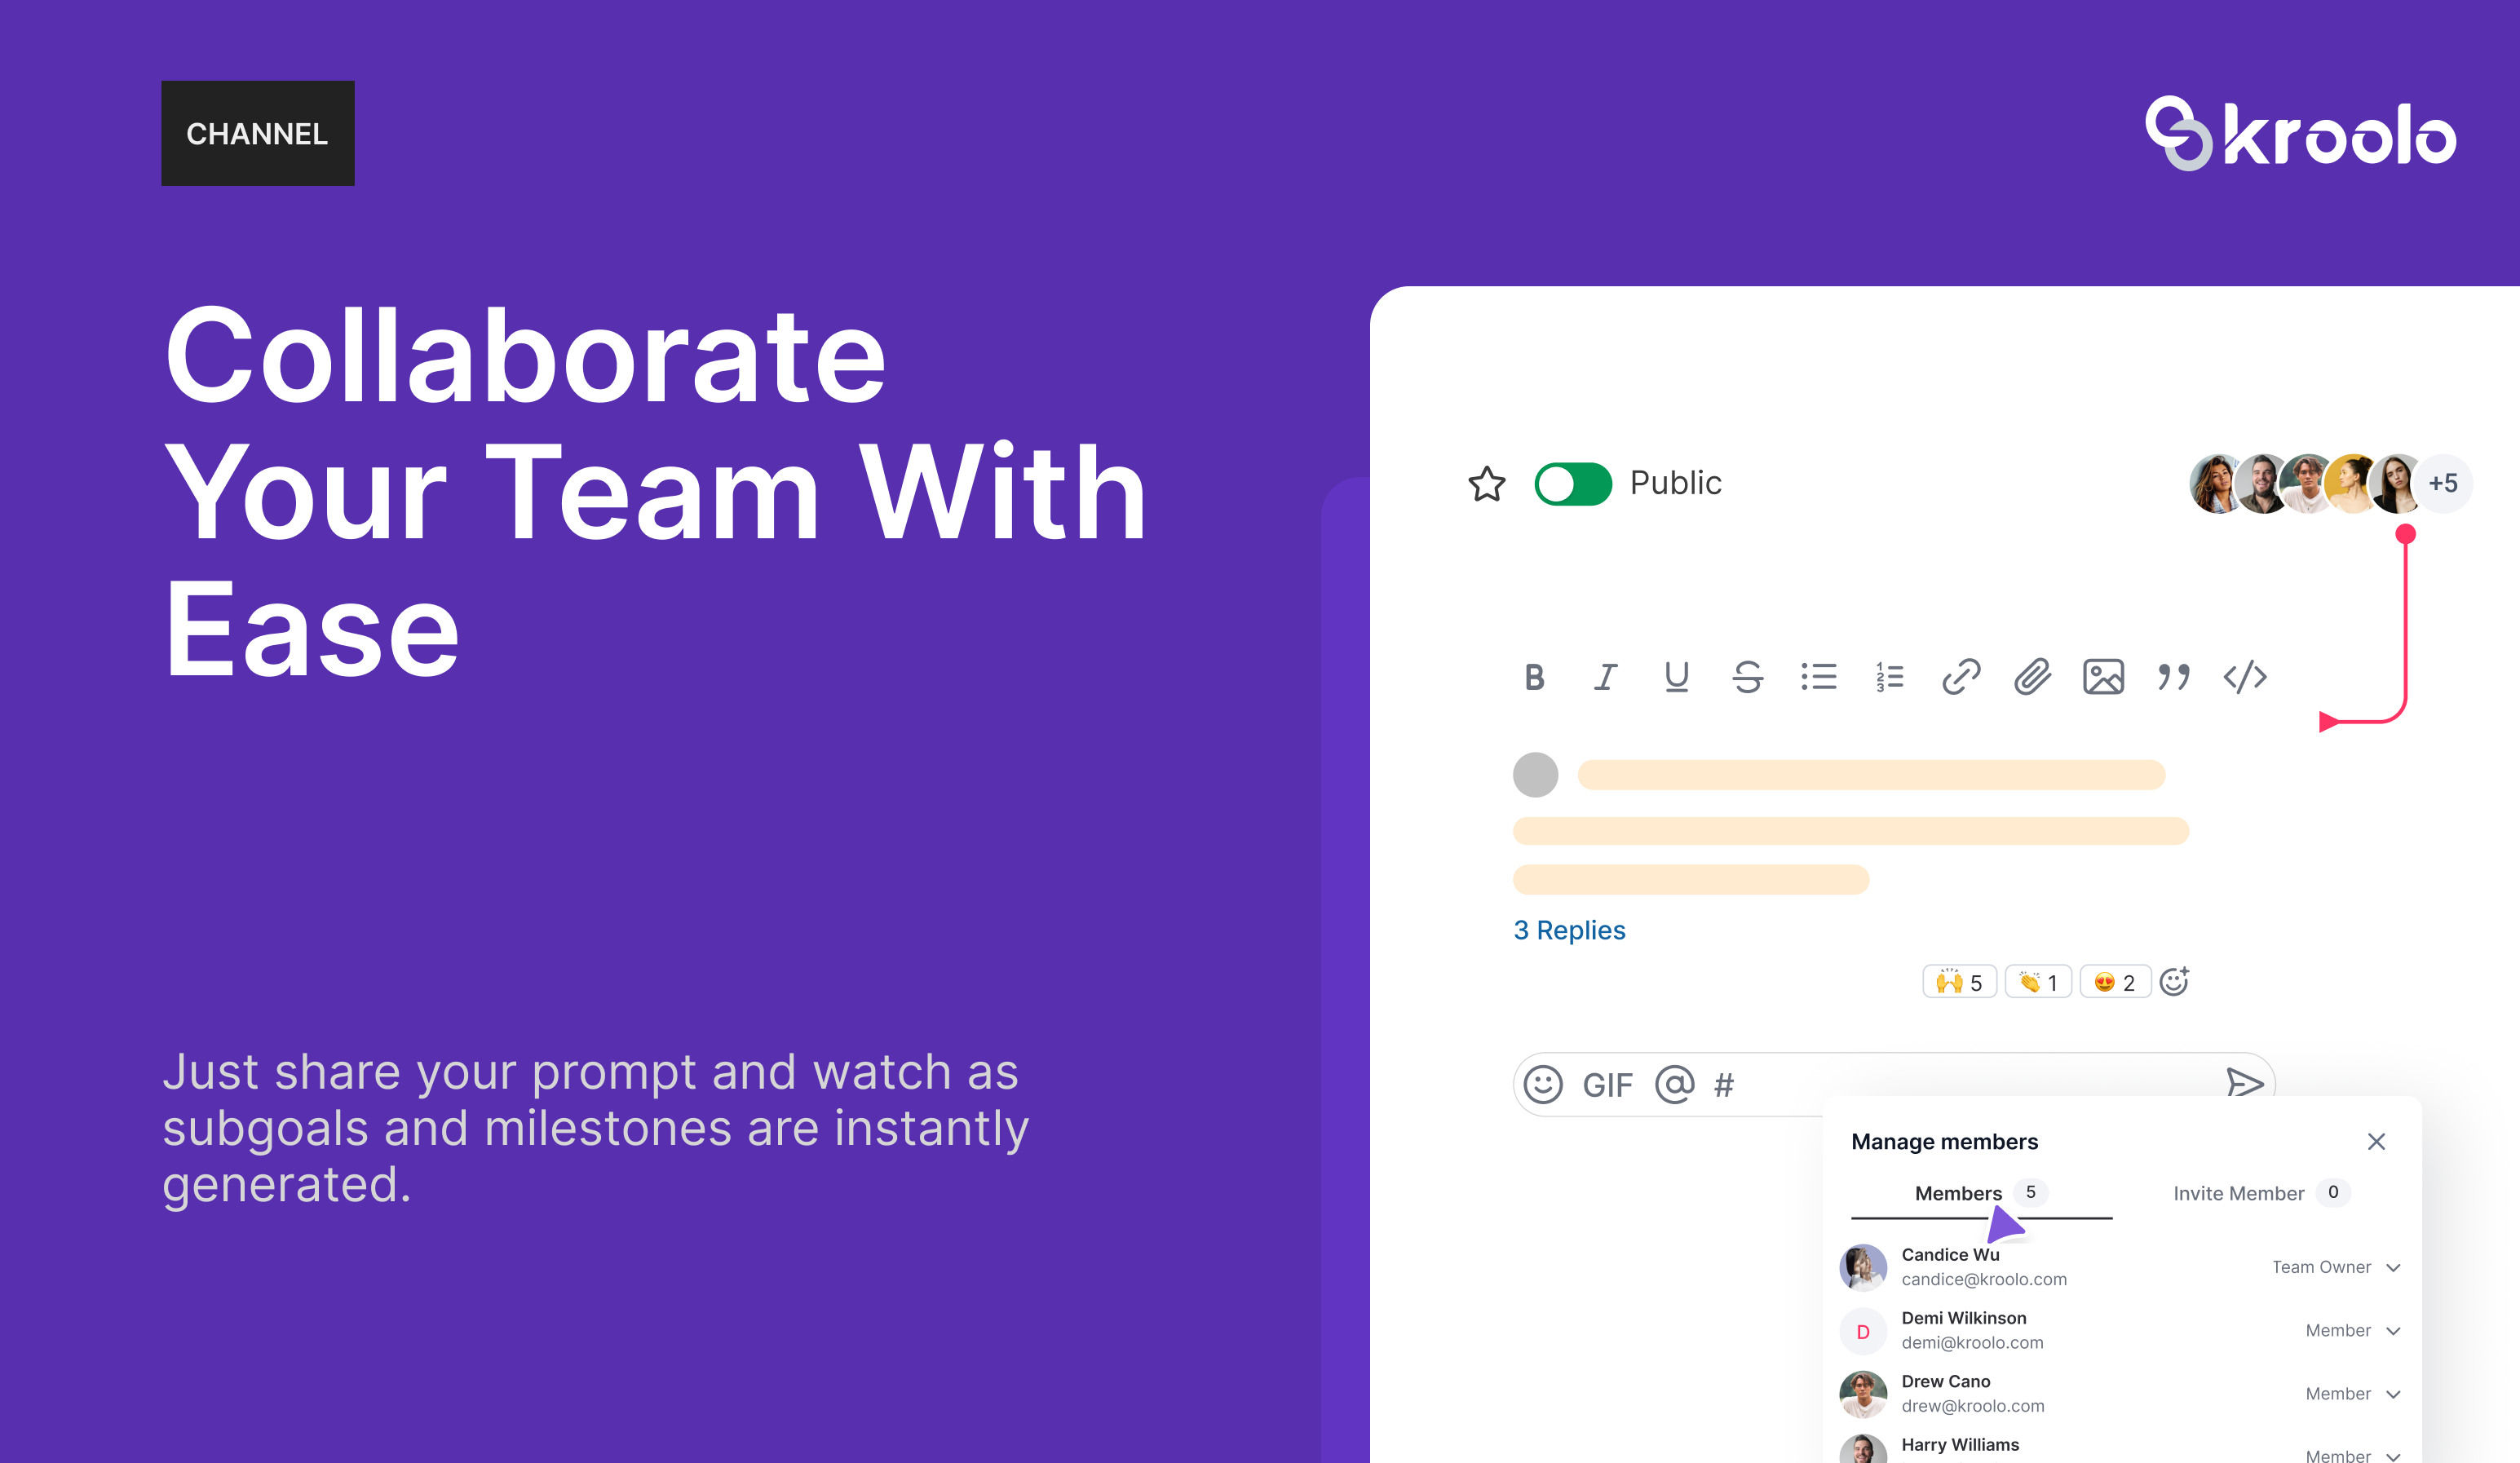 Channels & Chats - Create as many channels for teams, and chat with the members. You can forward, snooze or create specific threads within the message. Power of Slack-like feature within the platform.